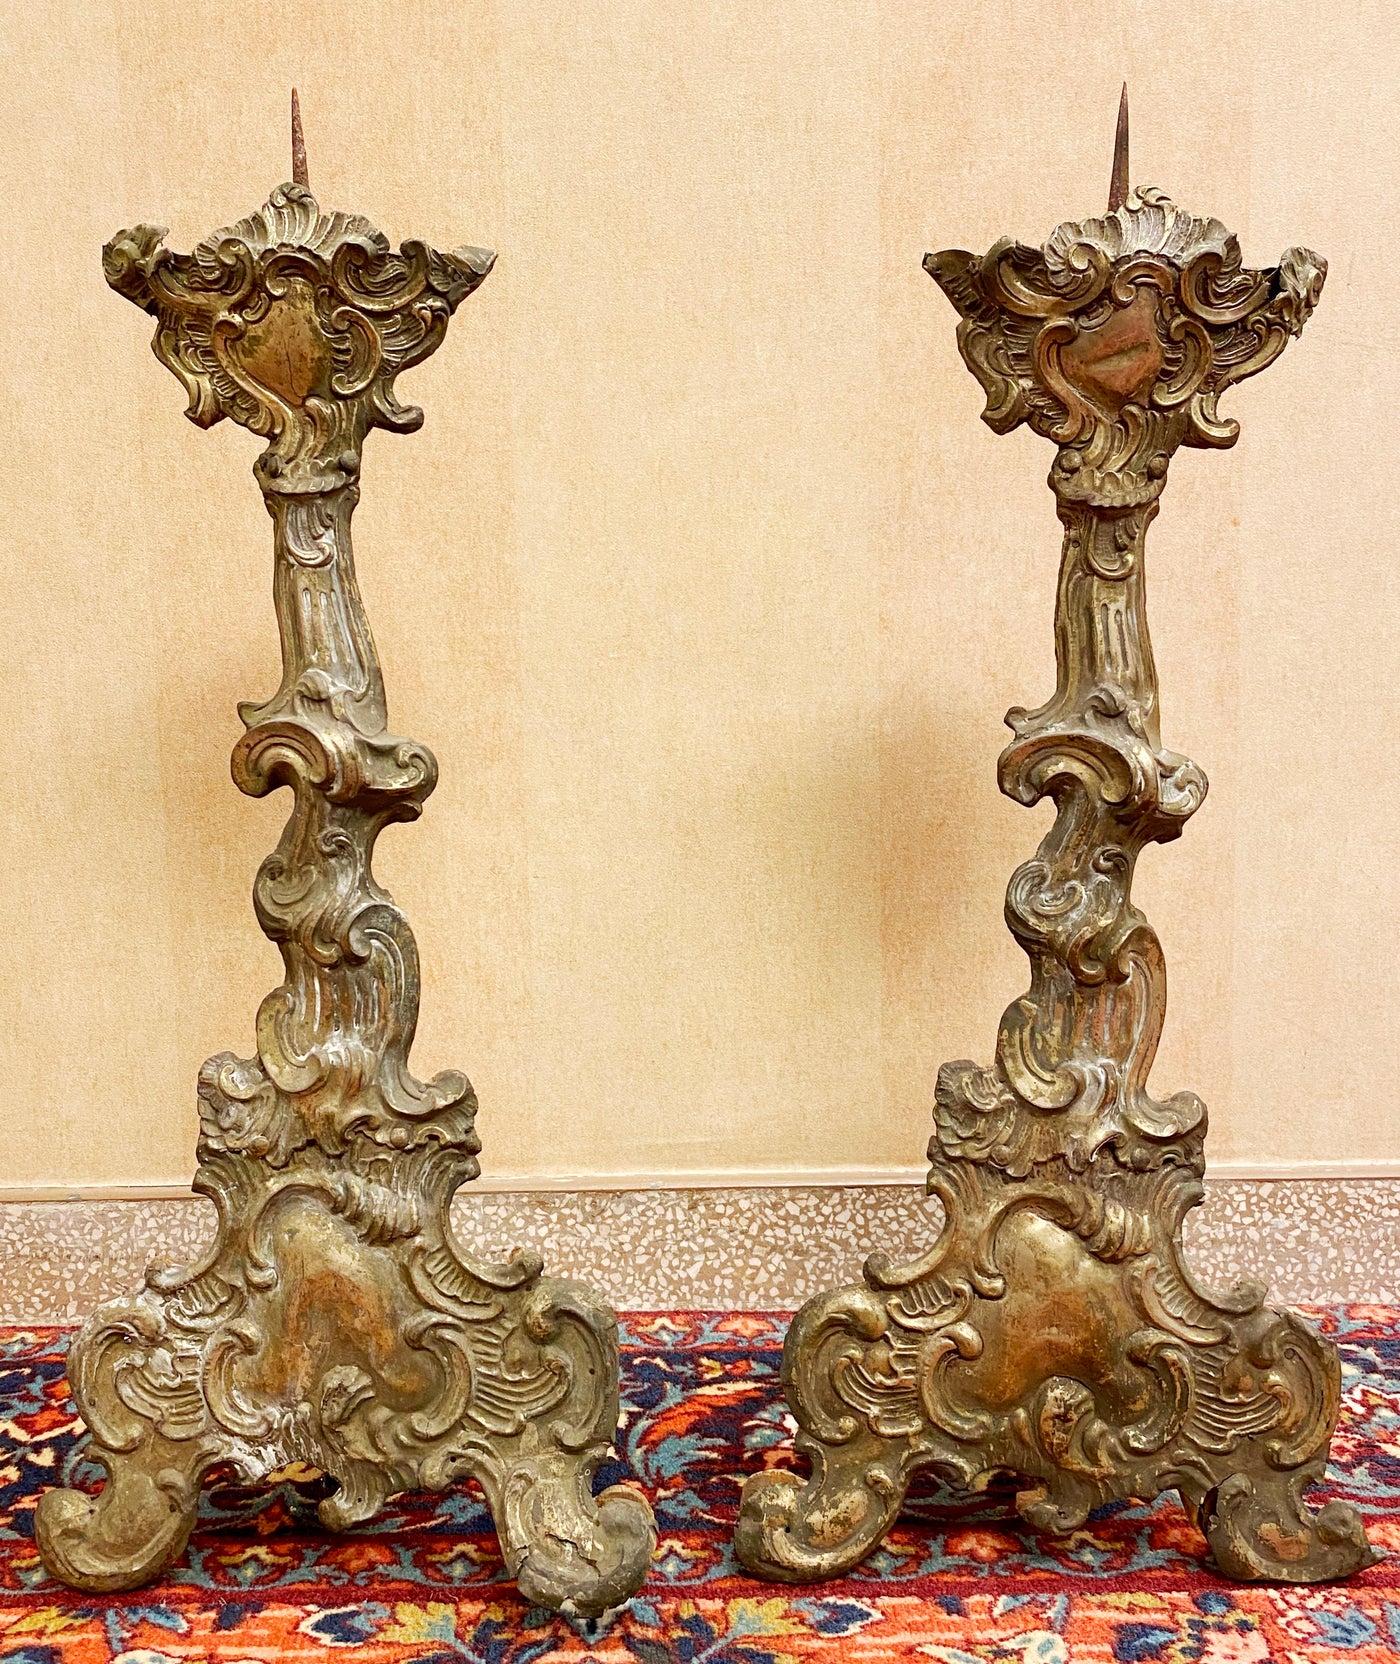 Pair of Large Early Spanish or Italian Altar Candlesticks